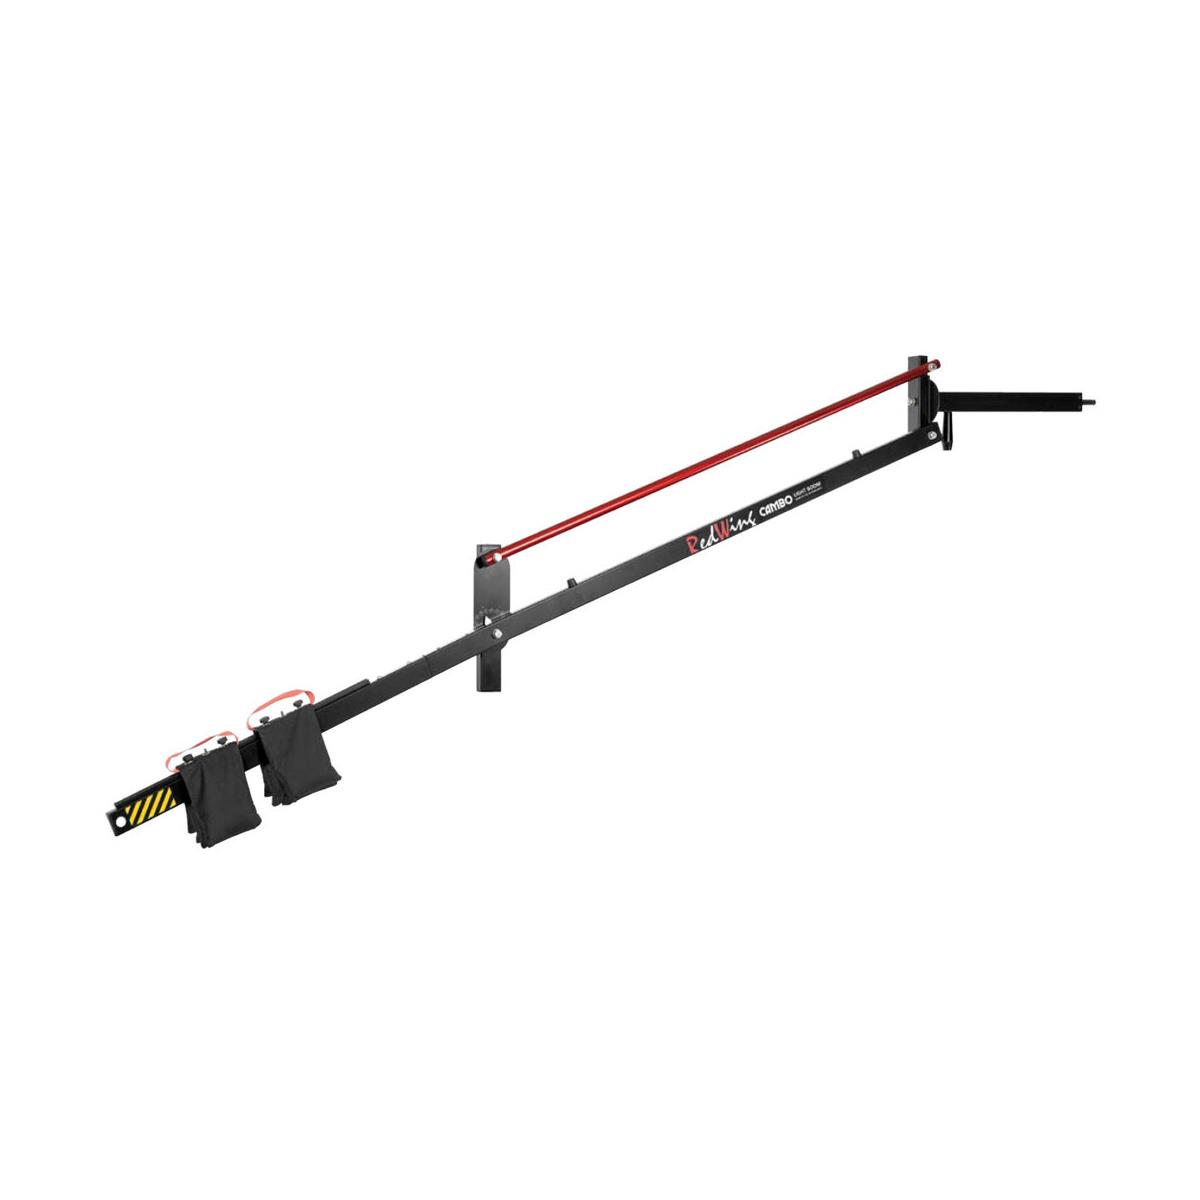 Image of Cambo RD-1201 Redwing Standard Light Boom with 2x Lead Shot Counterweight